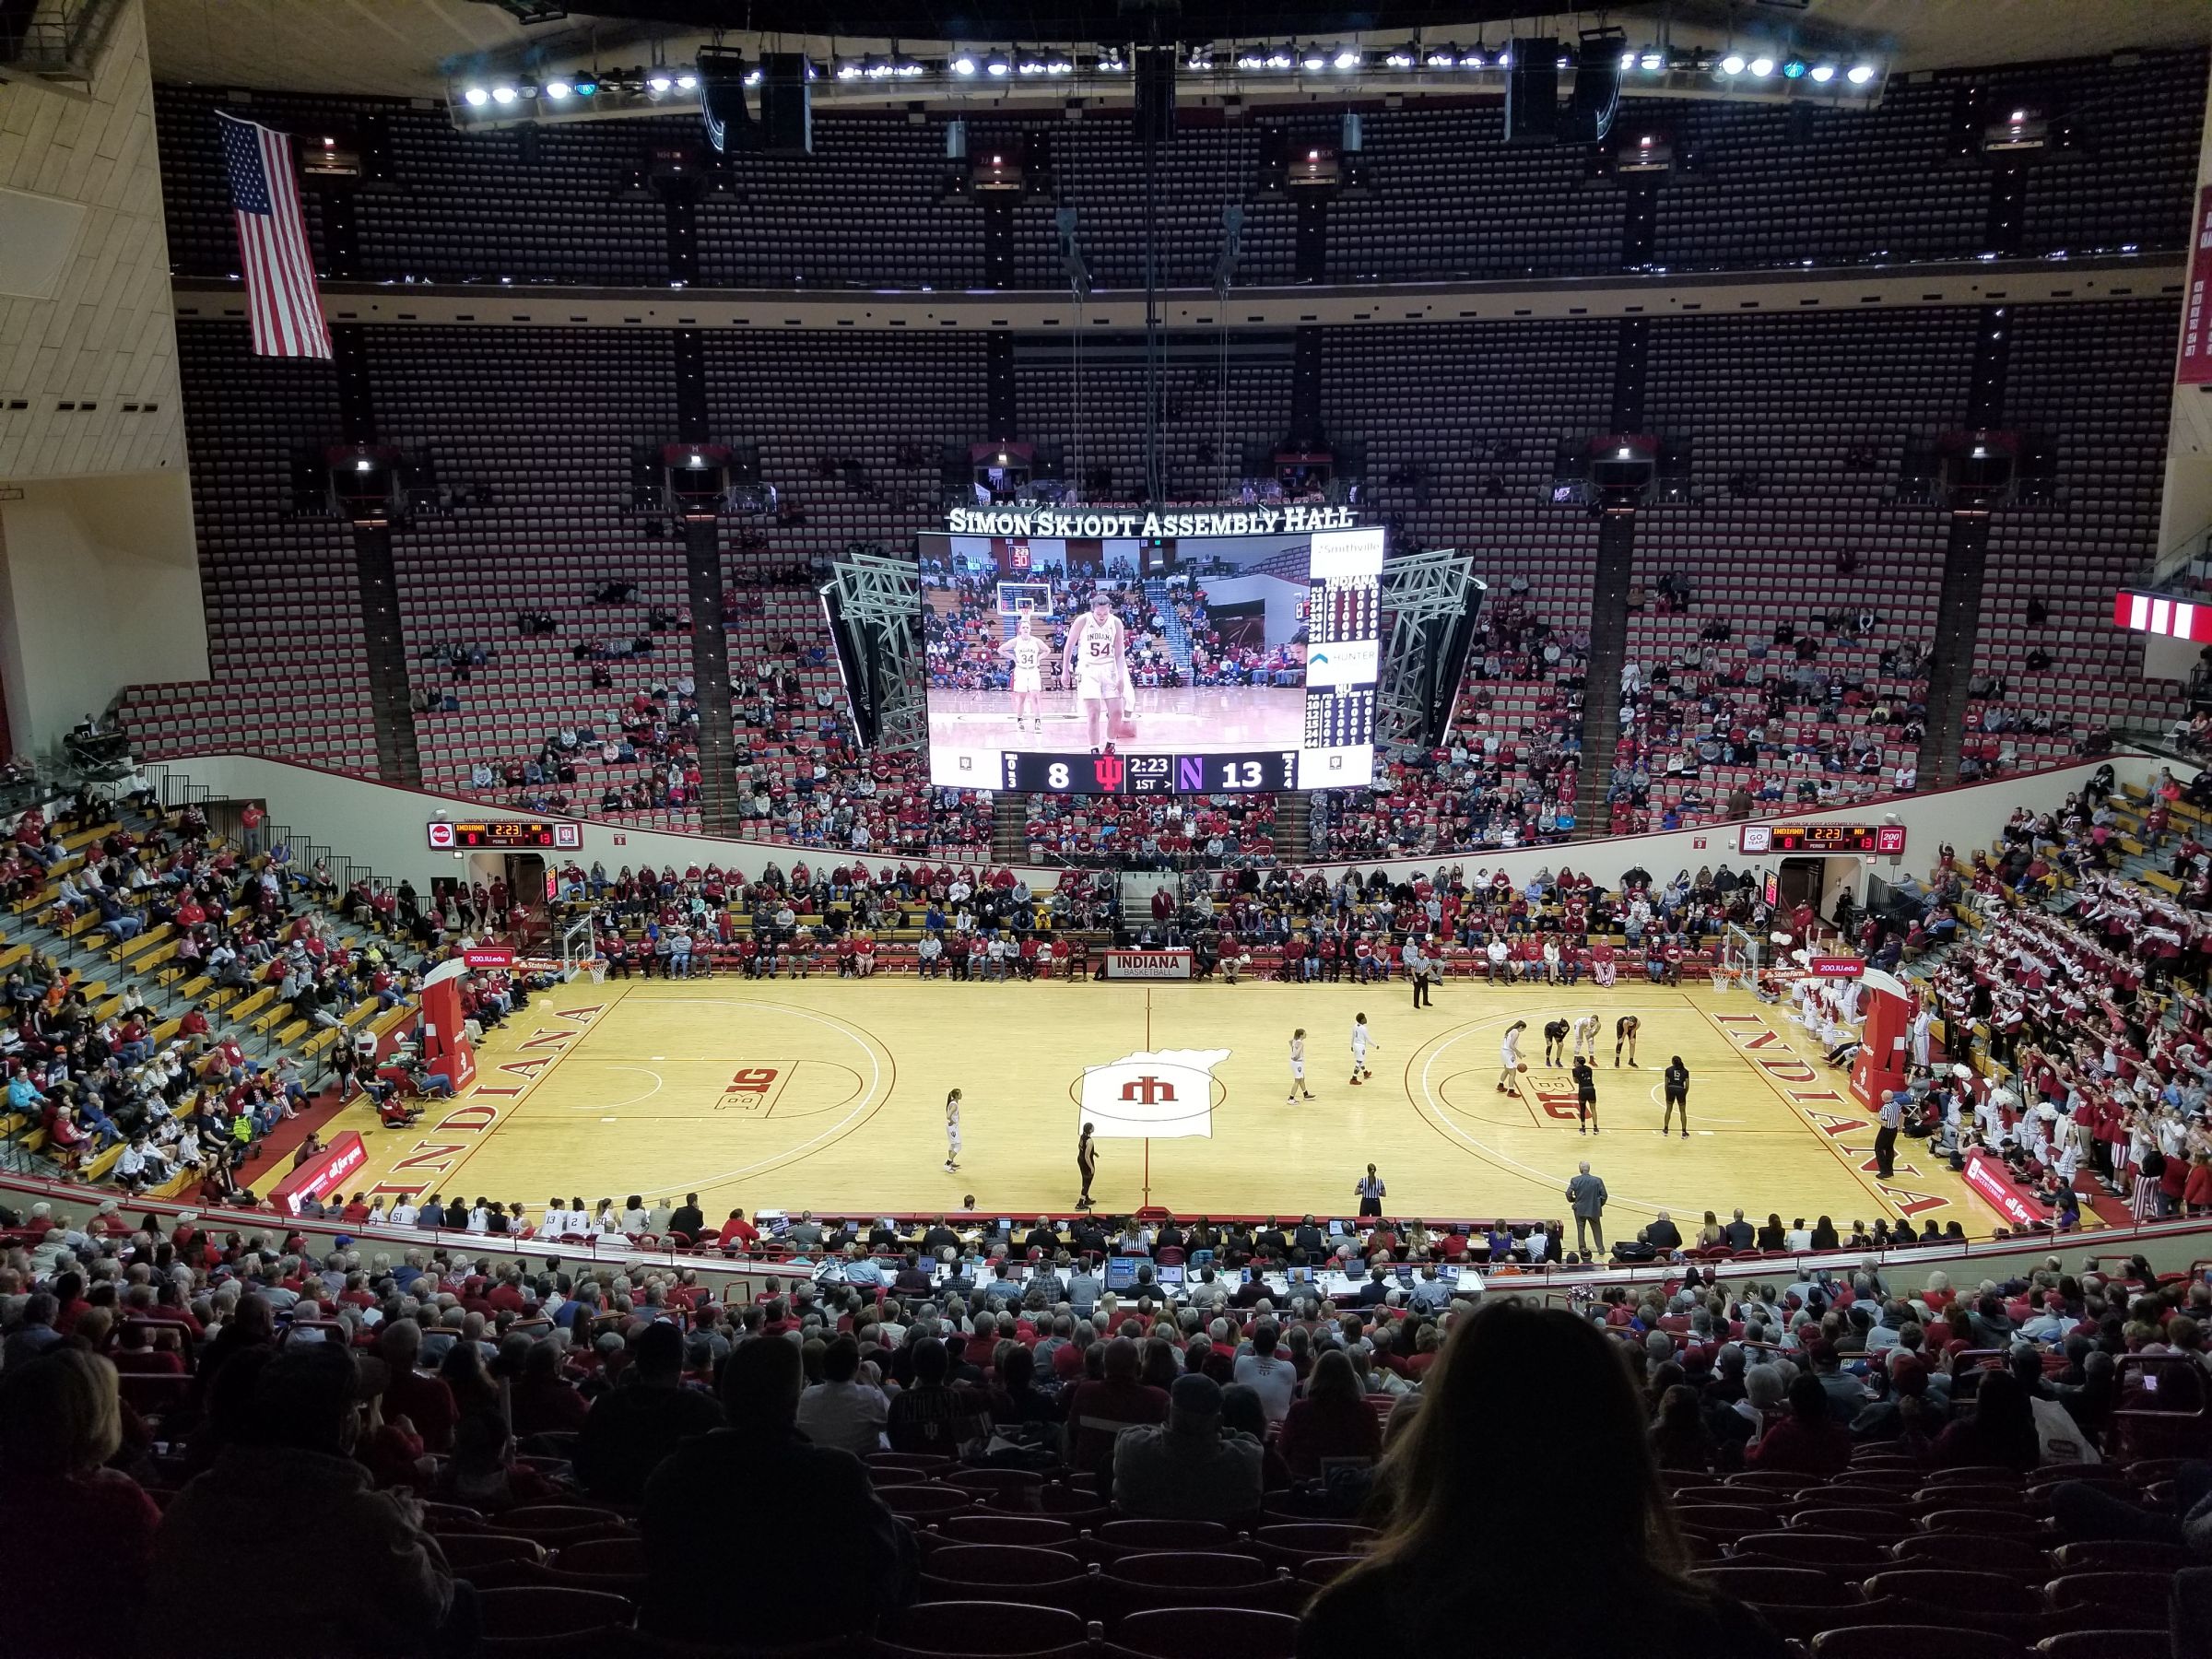 section c, row 31 seat view  - assembly hall